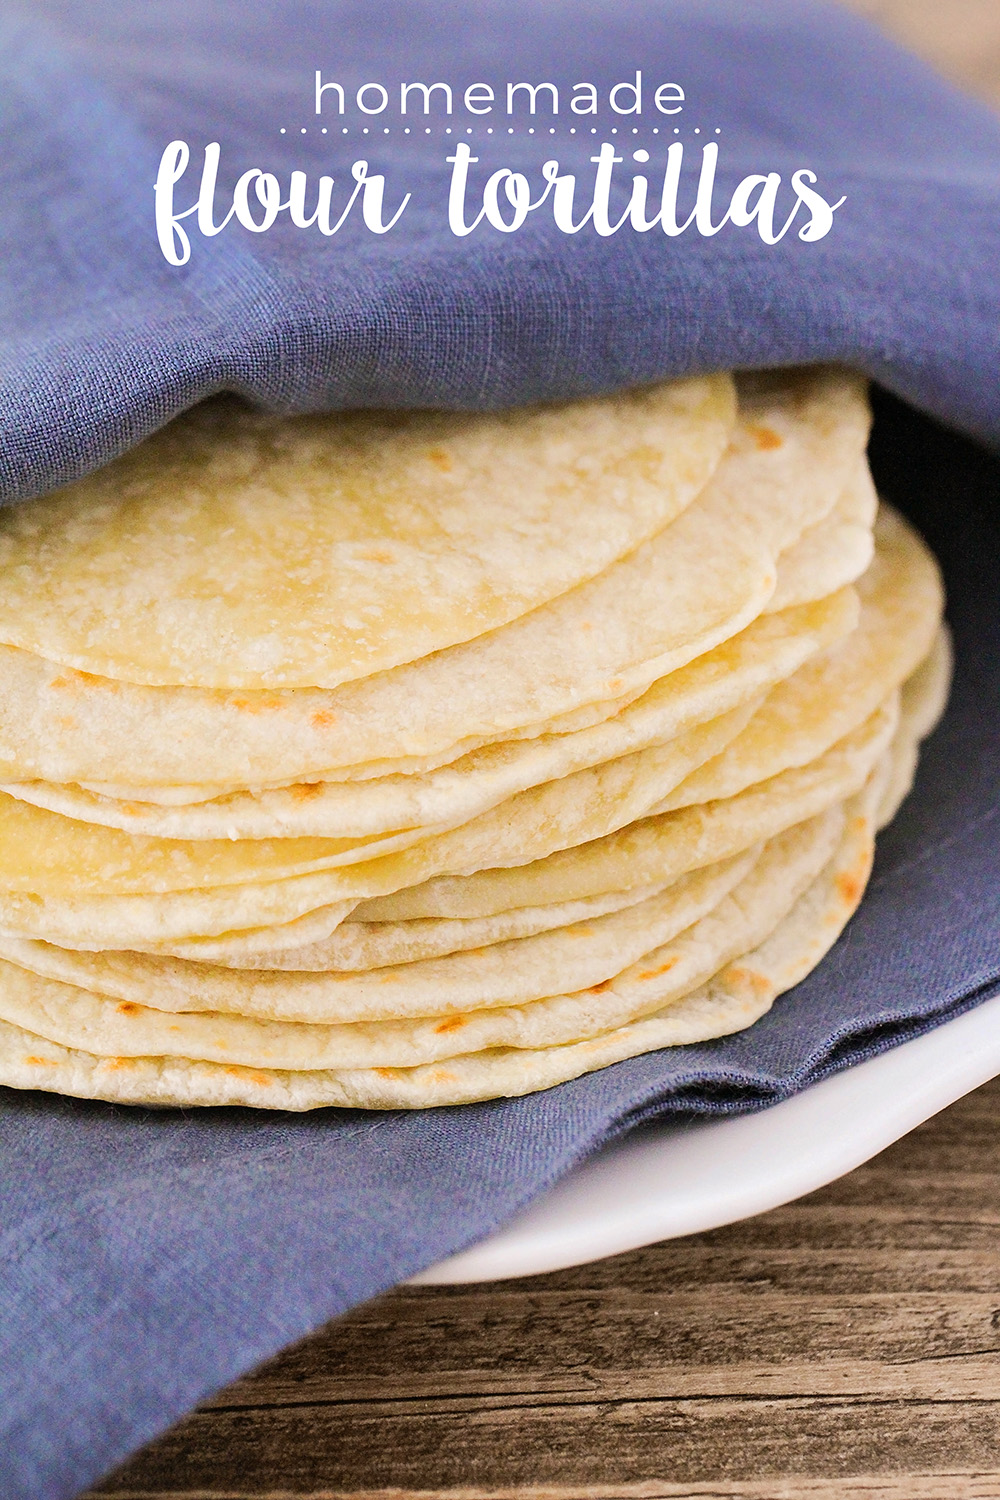 These homemade flour tortillas are so soft and tender, and simple too. Only four ingredients and about 30 minutes to make!